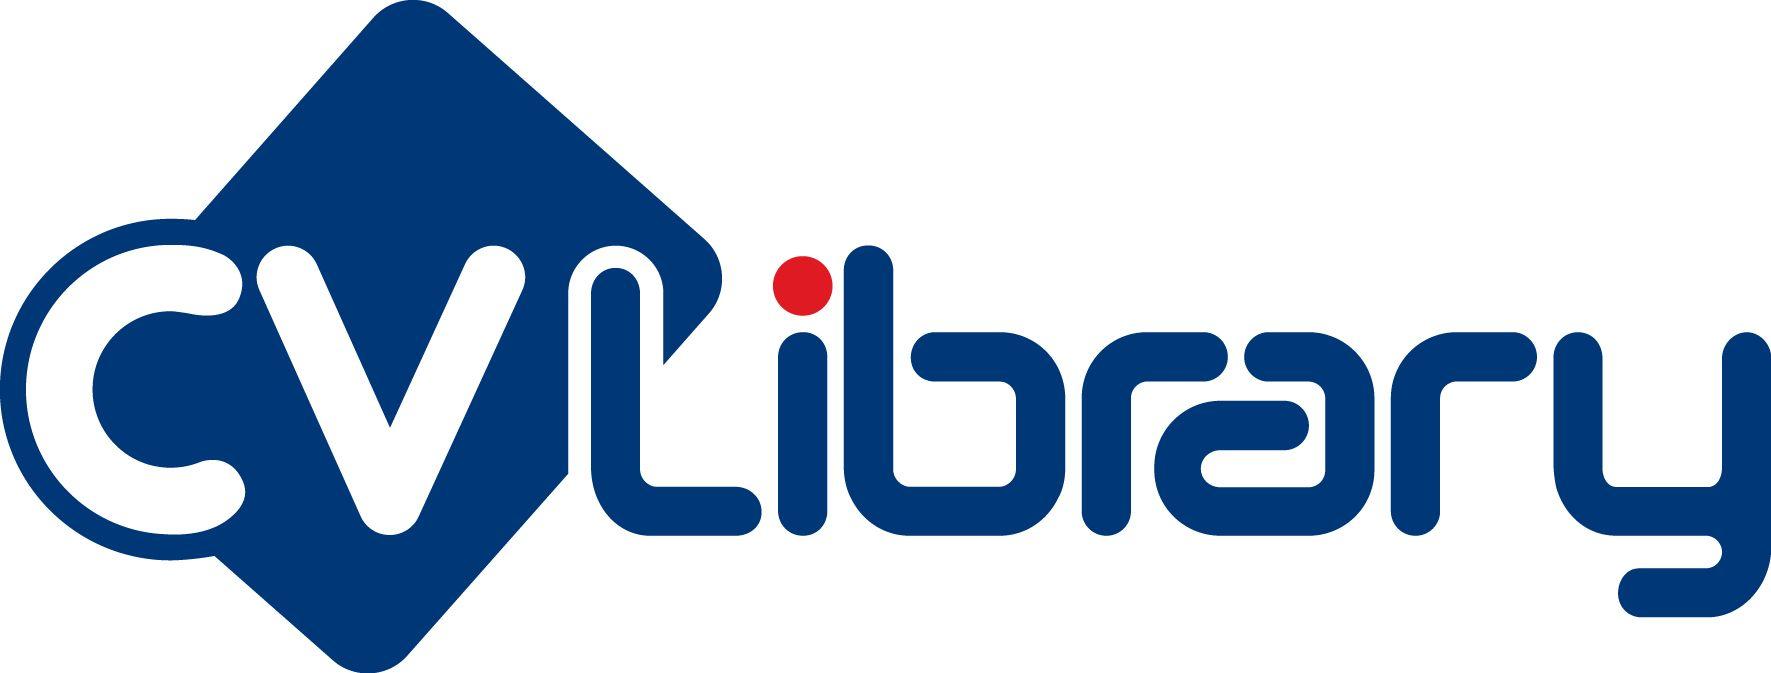 Library Logo - Job Search - Find 195,000 UK jobs on CV-Library